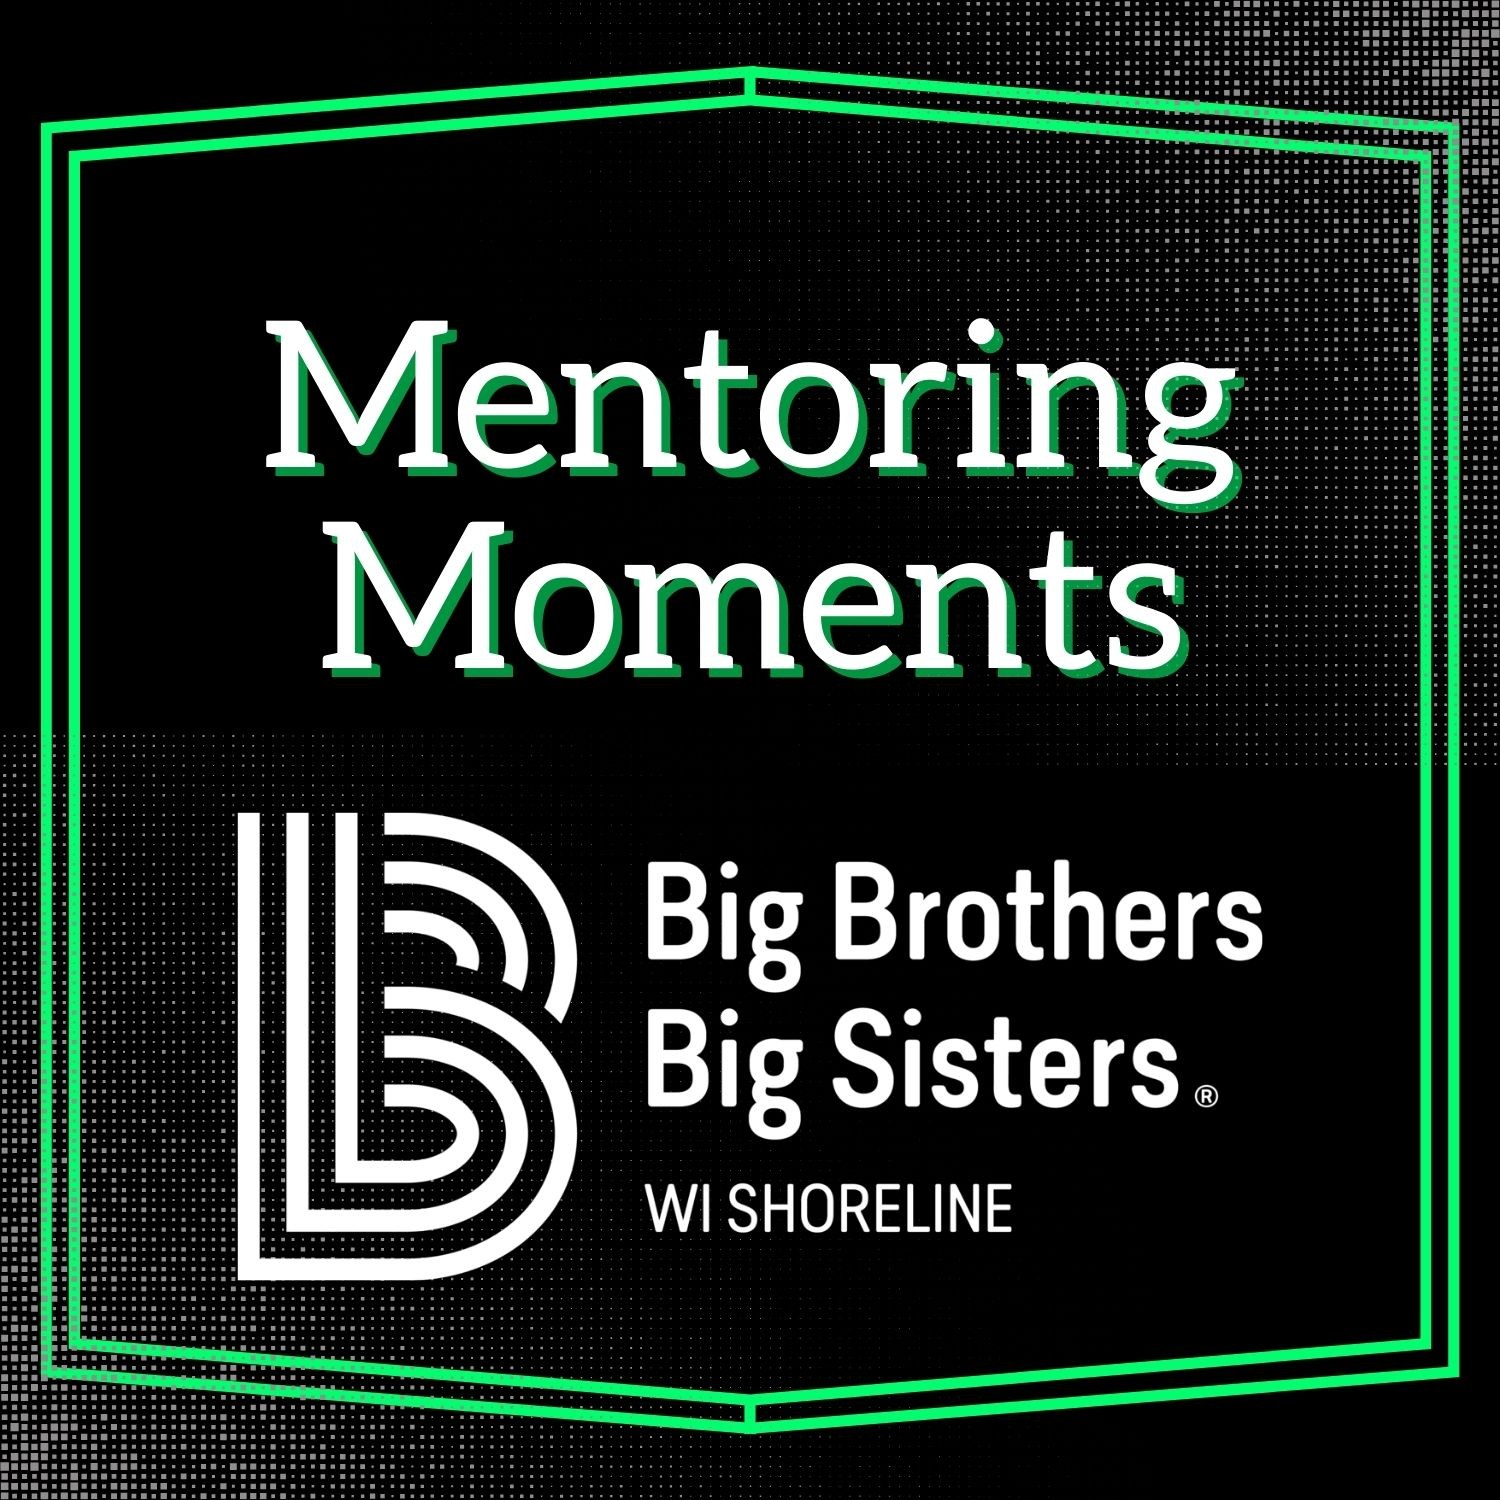 Mentoring Moments with Big Brothers Big Sisters